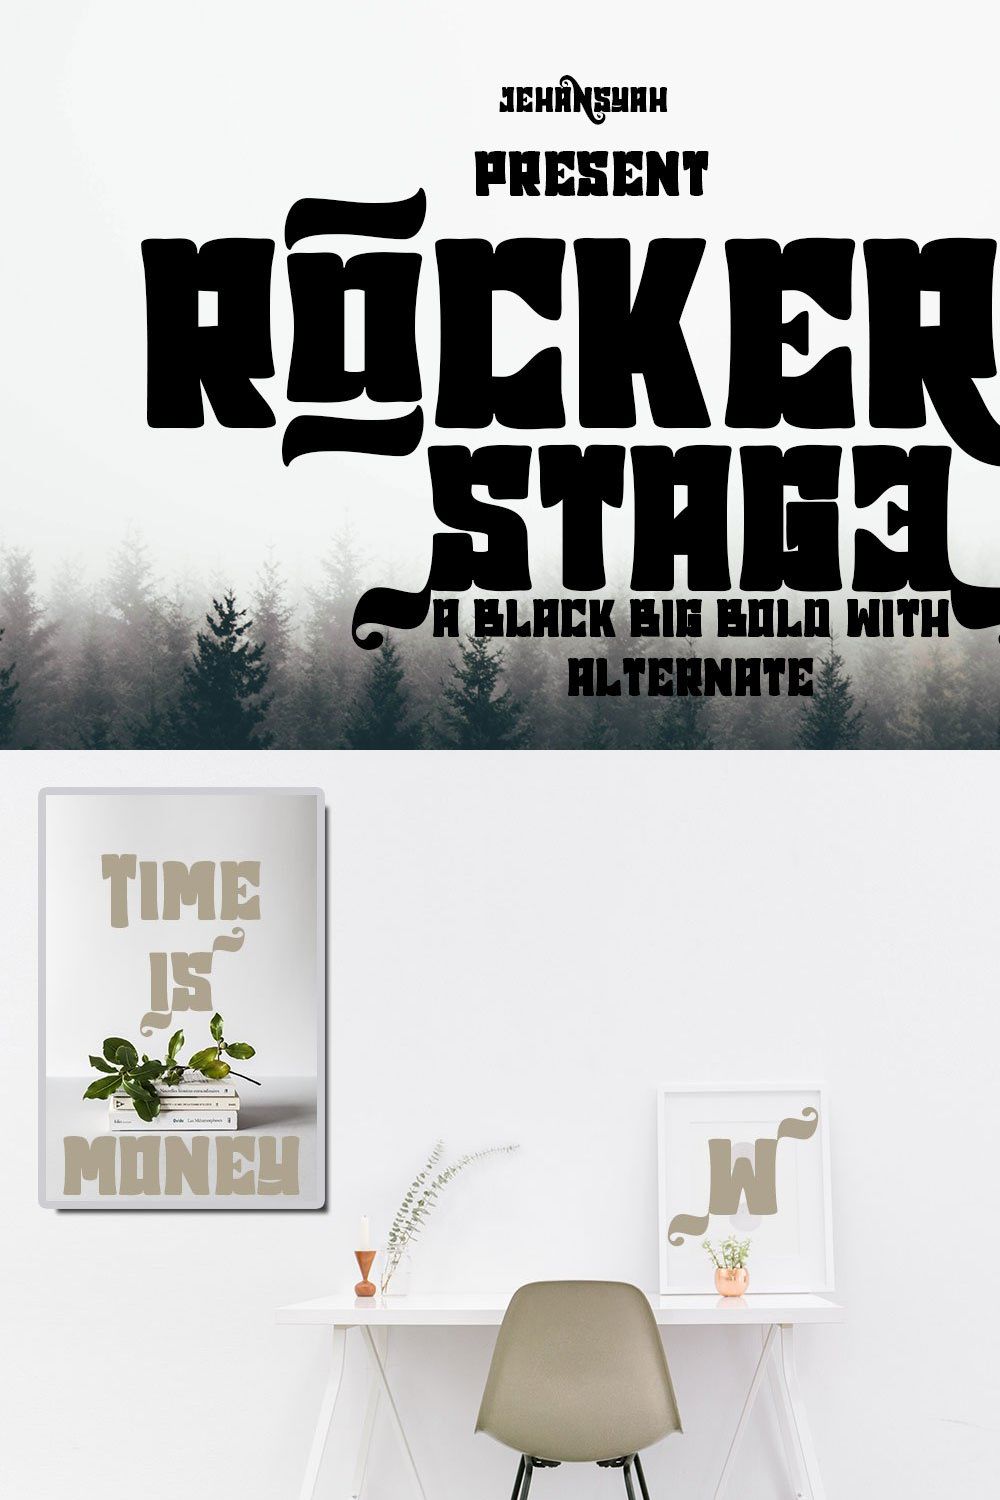 Rocker stage pinterest preview image.